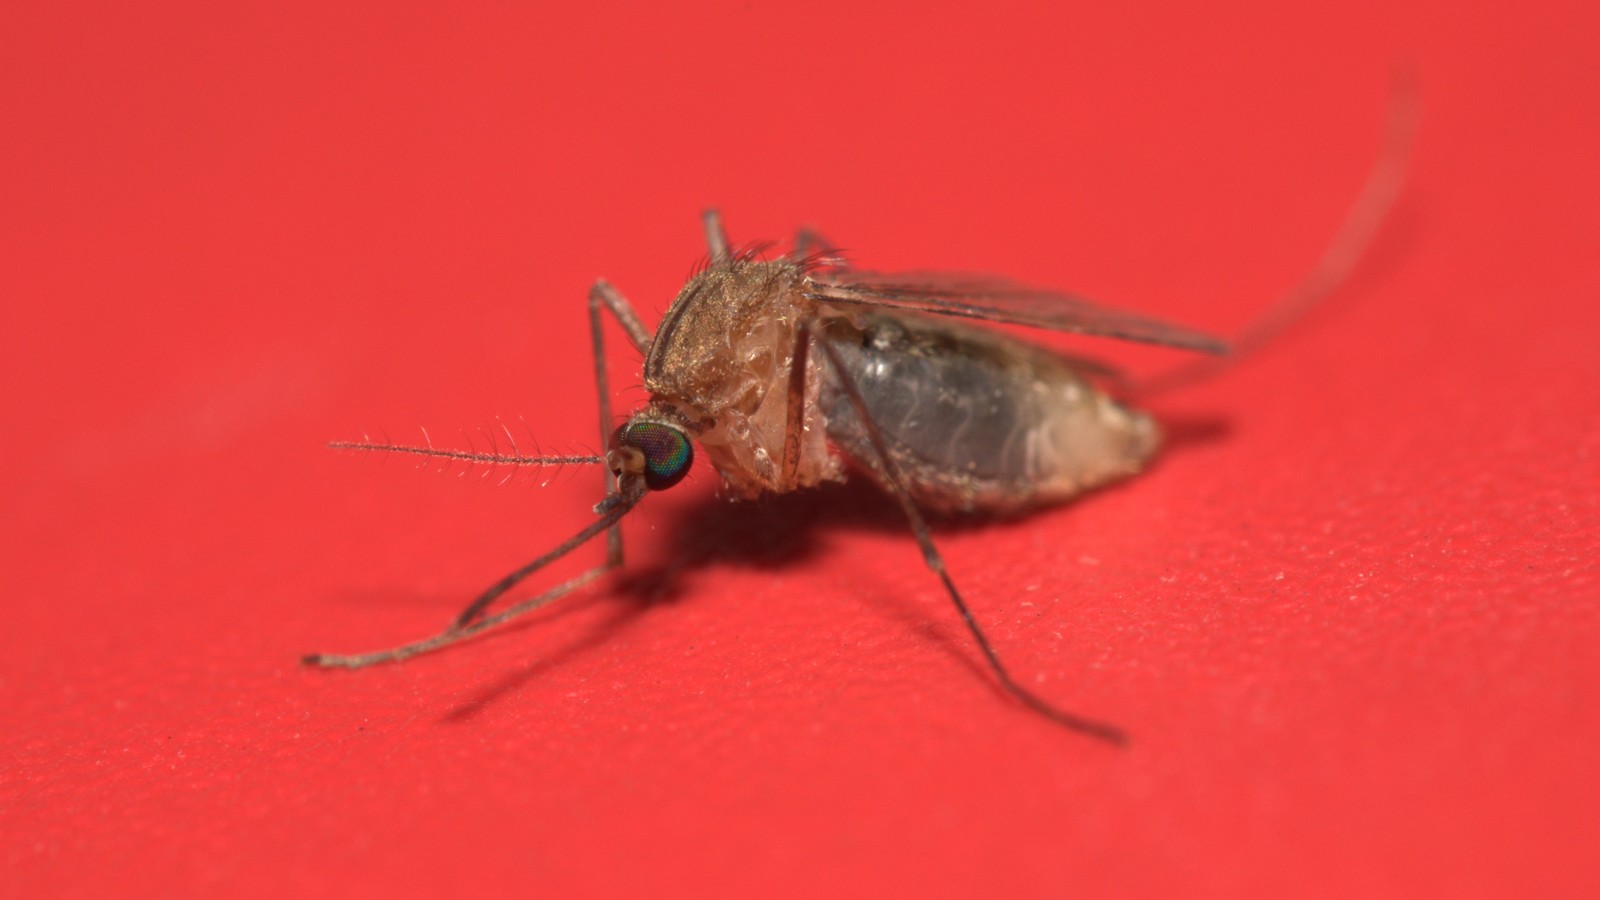 Killing Mosquitoes to End Malaria: What Would Happen? - The Atlantic